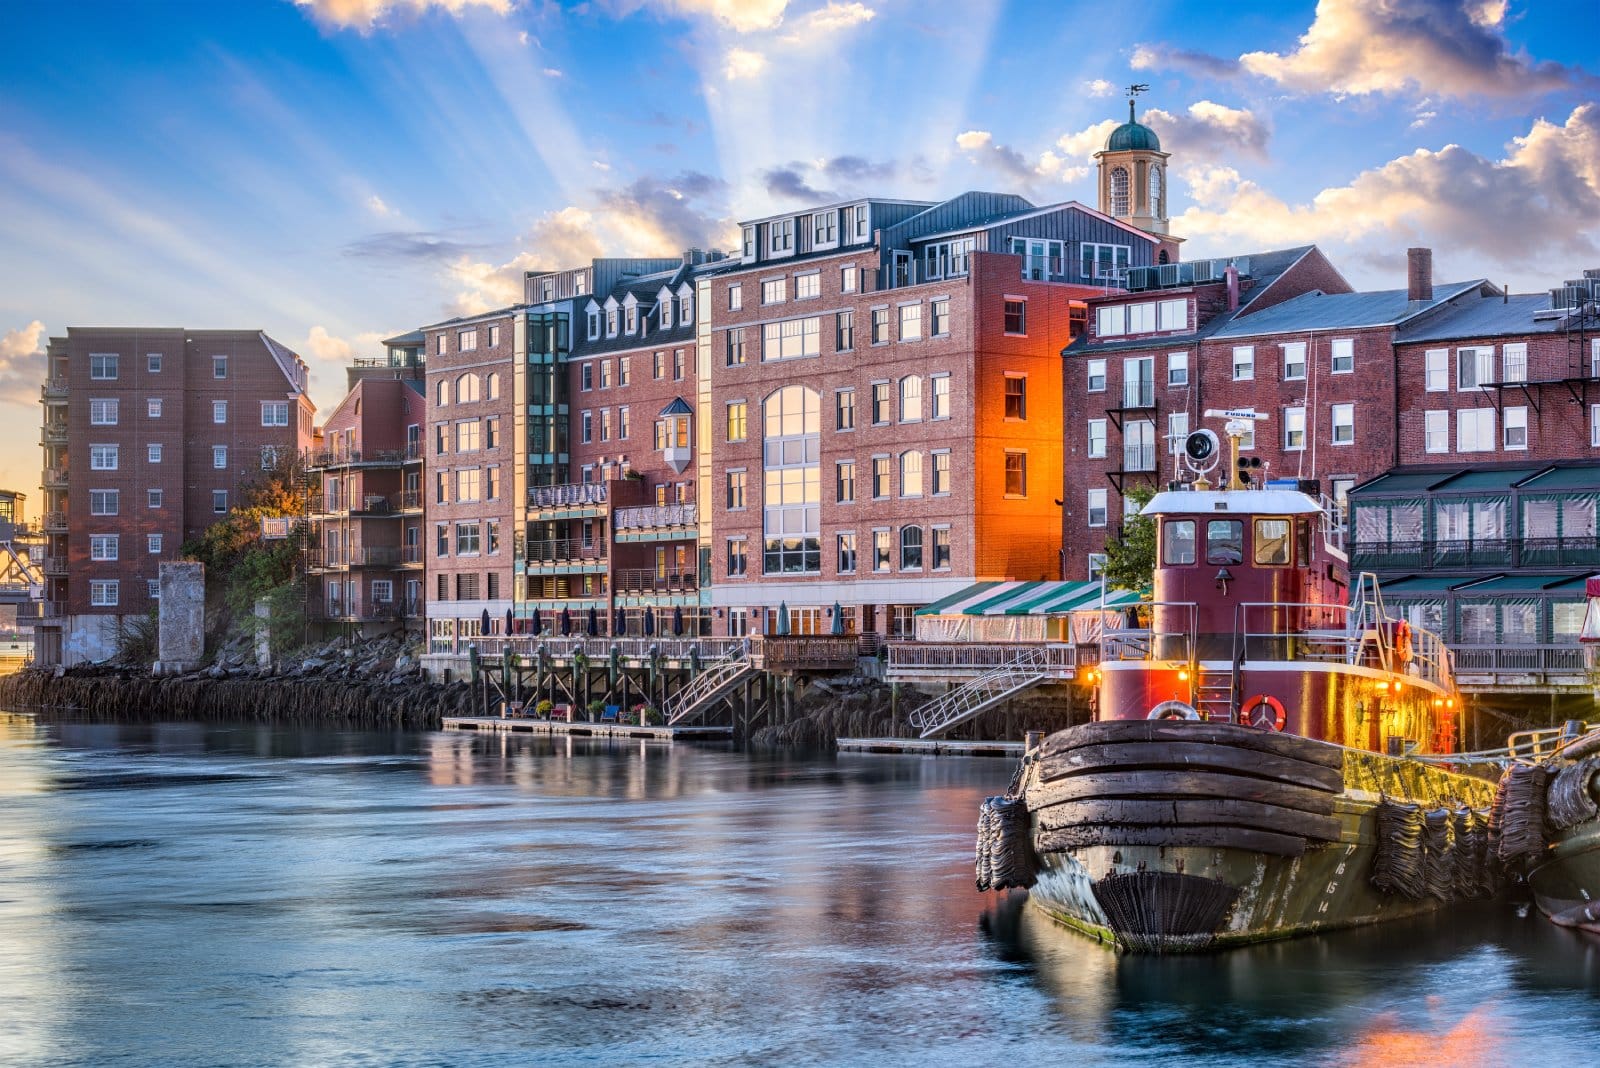 <p class="wp-caption-text">Image Credit: Shutterstock / Sean Pavone</p>  <p><span>This historic seaport town offers charm, culture, and coastal views. Explore Portsmouth’s rich history, vibrant arts scene, and culinary delights.</span></p>